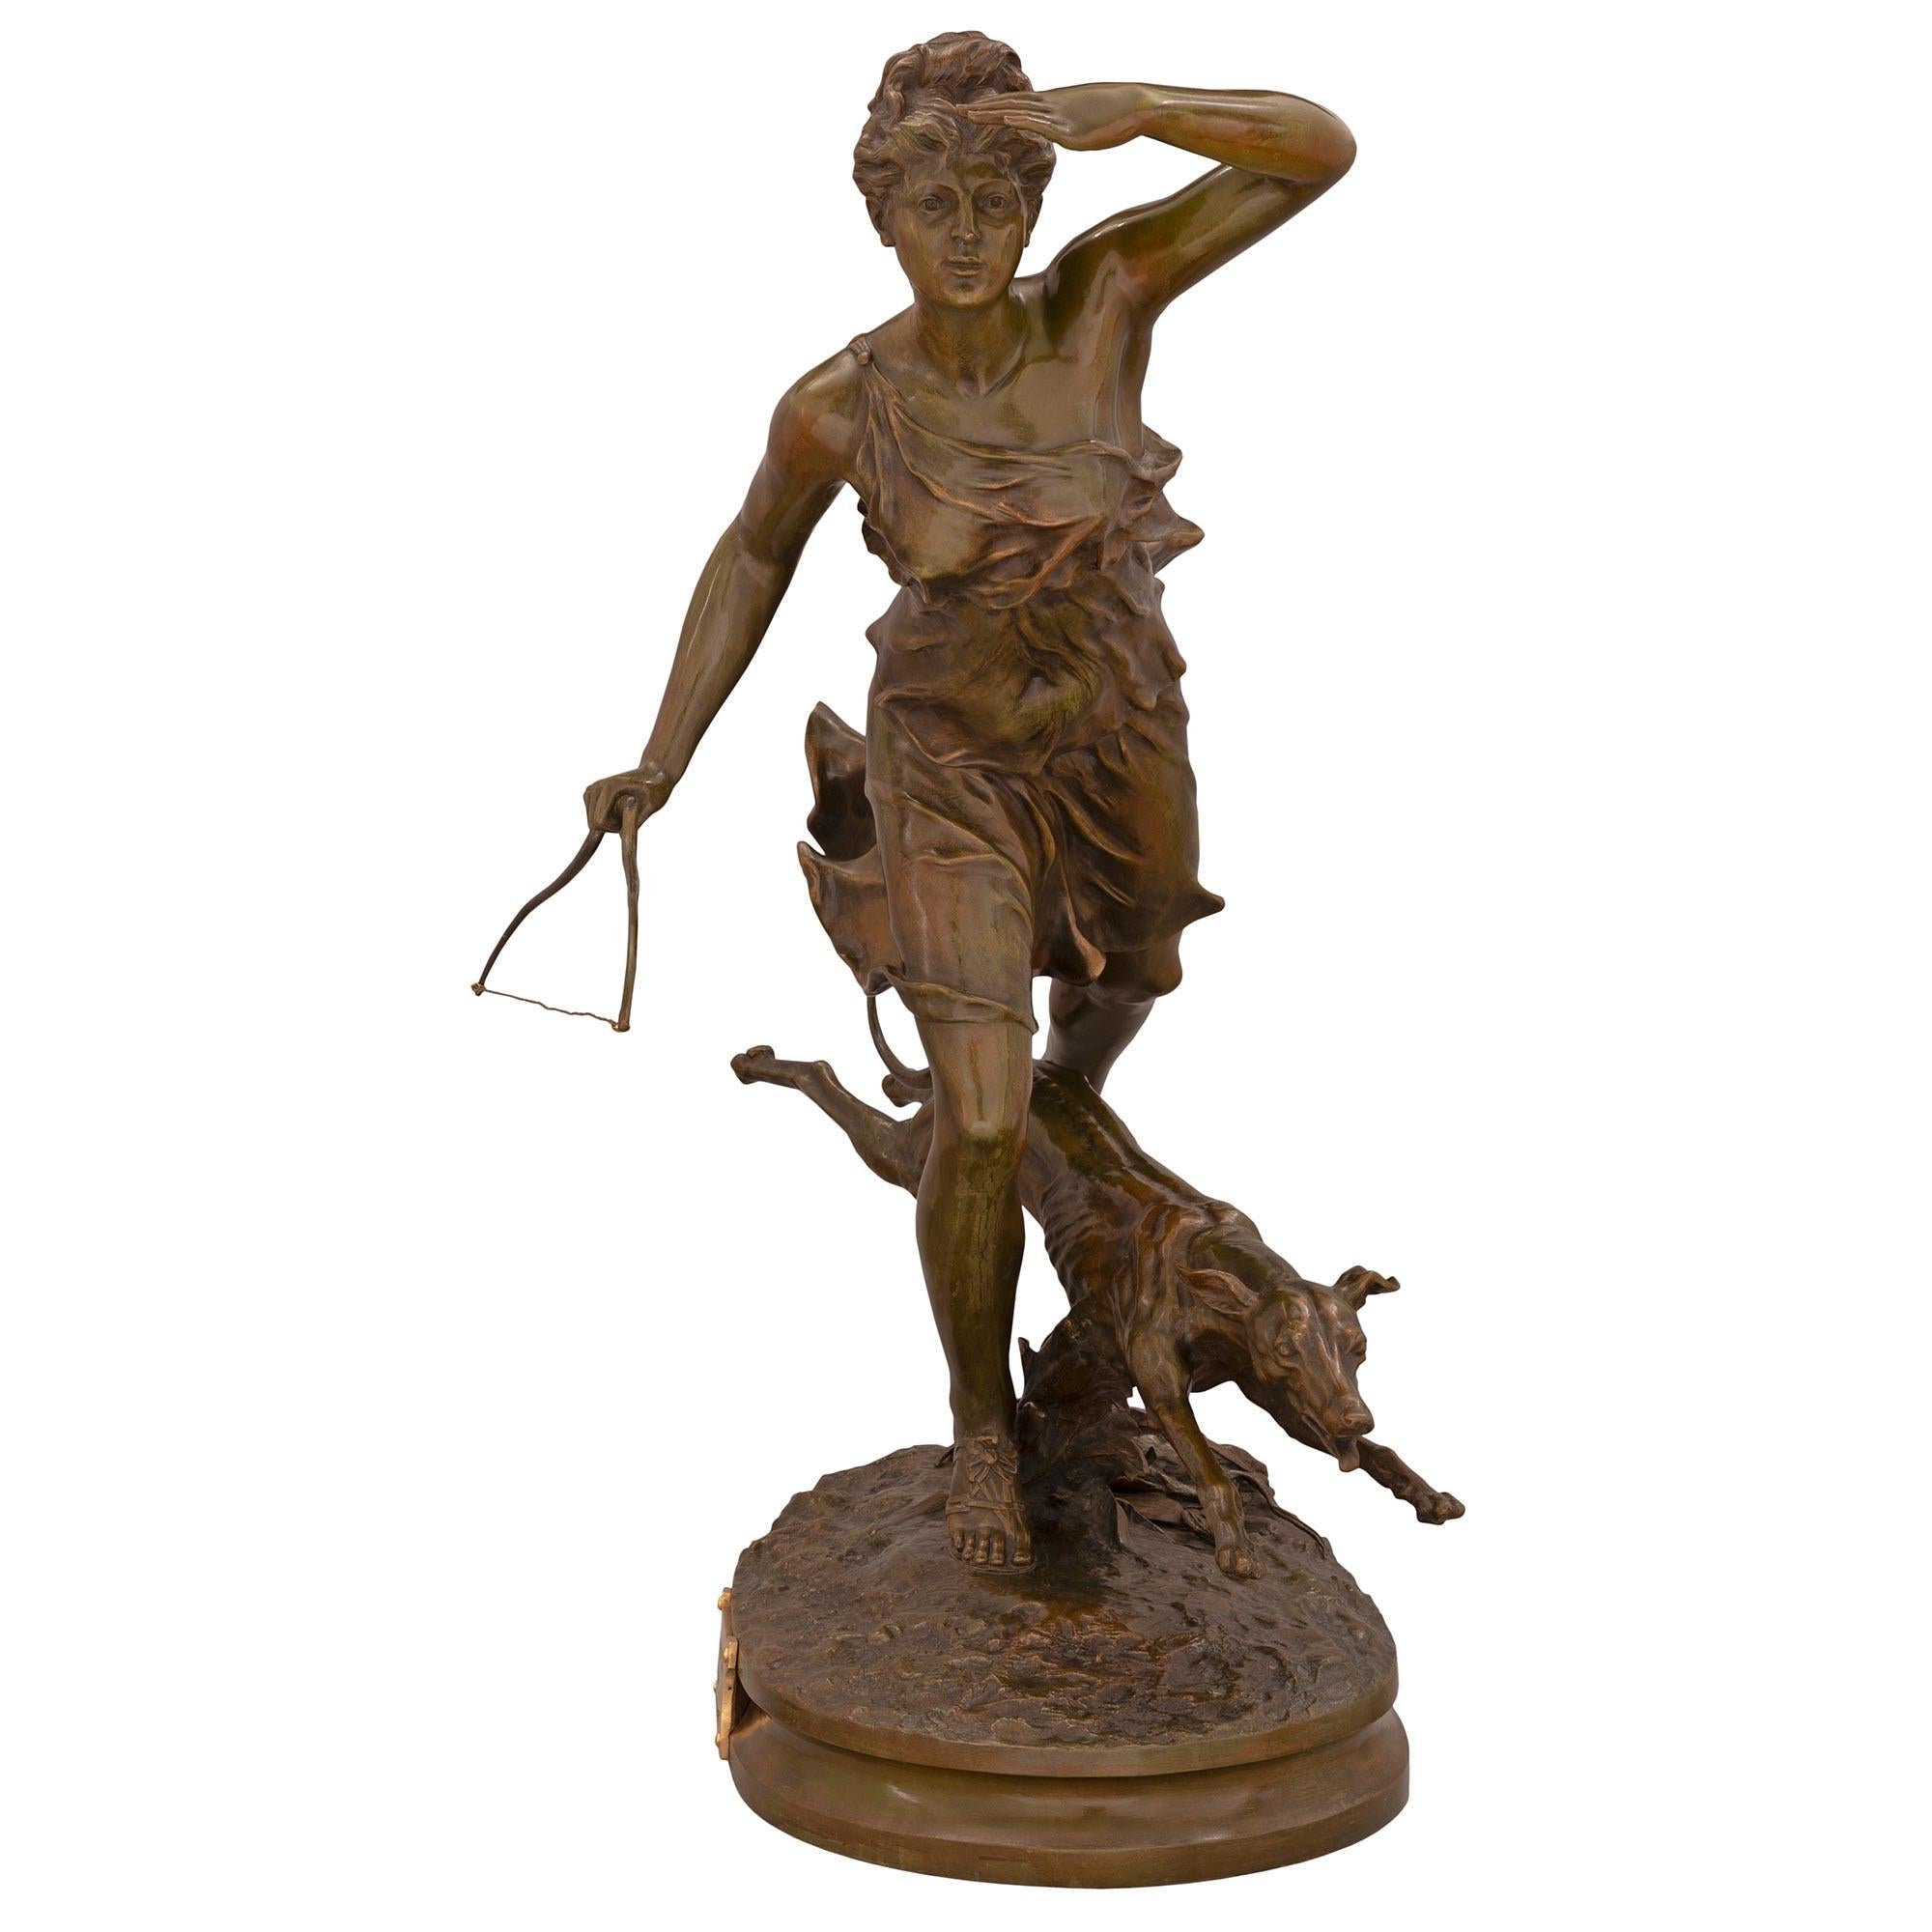 French Turn-of-the-century Louis XVI St. Statue of Diana the Huntress In Good Condition For Sale In West Palm Beach, FL